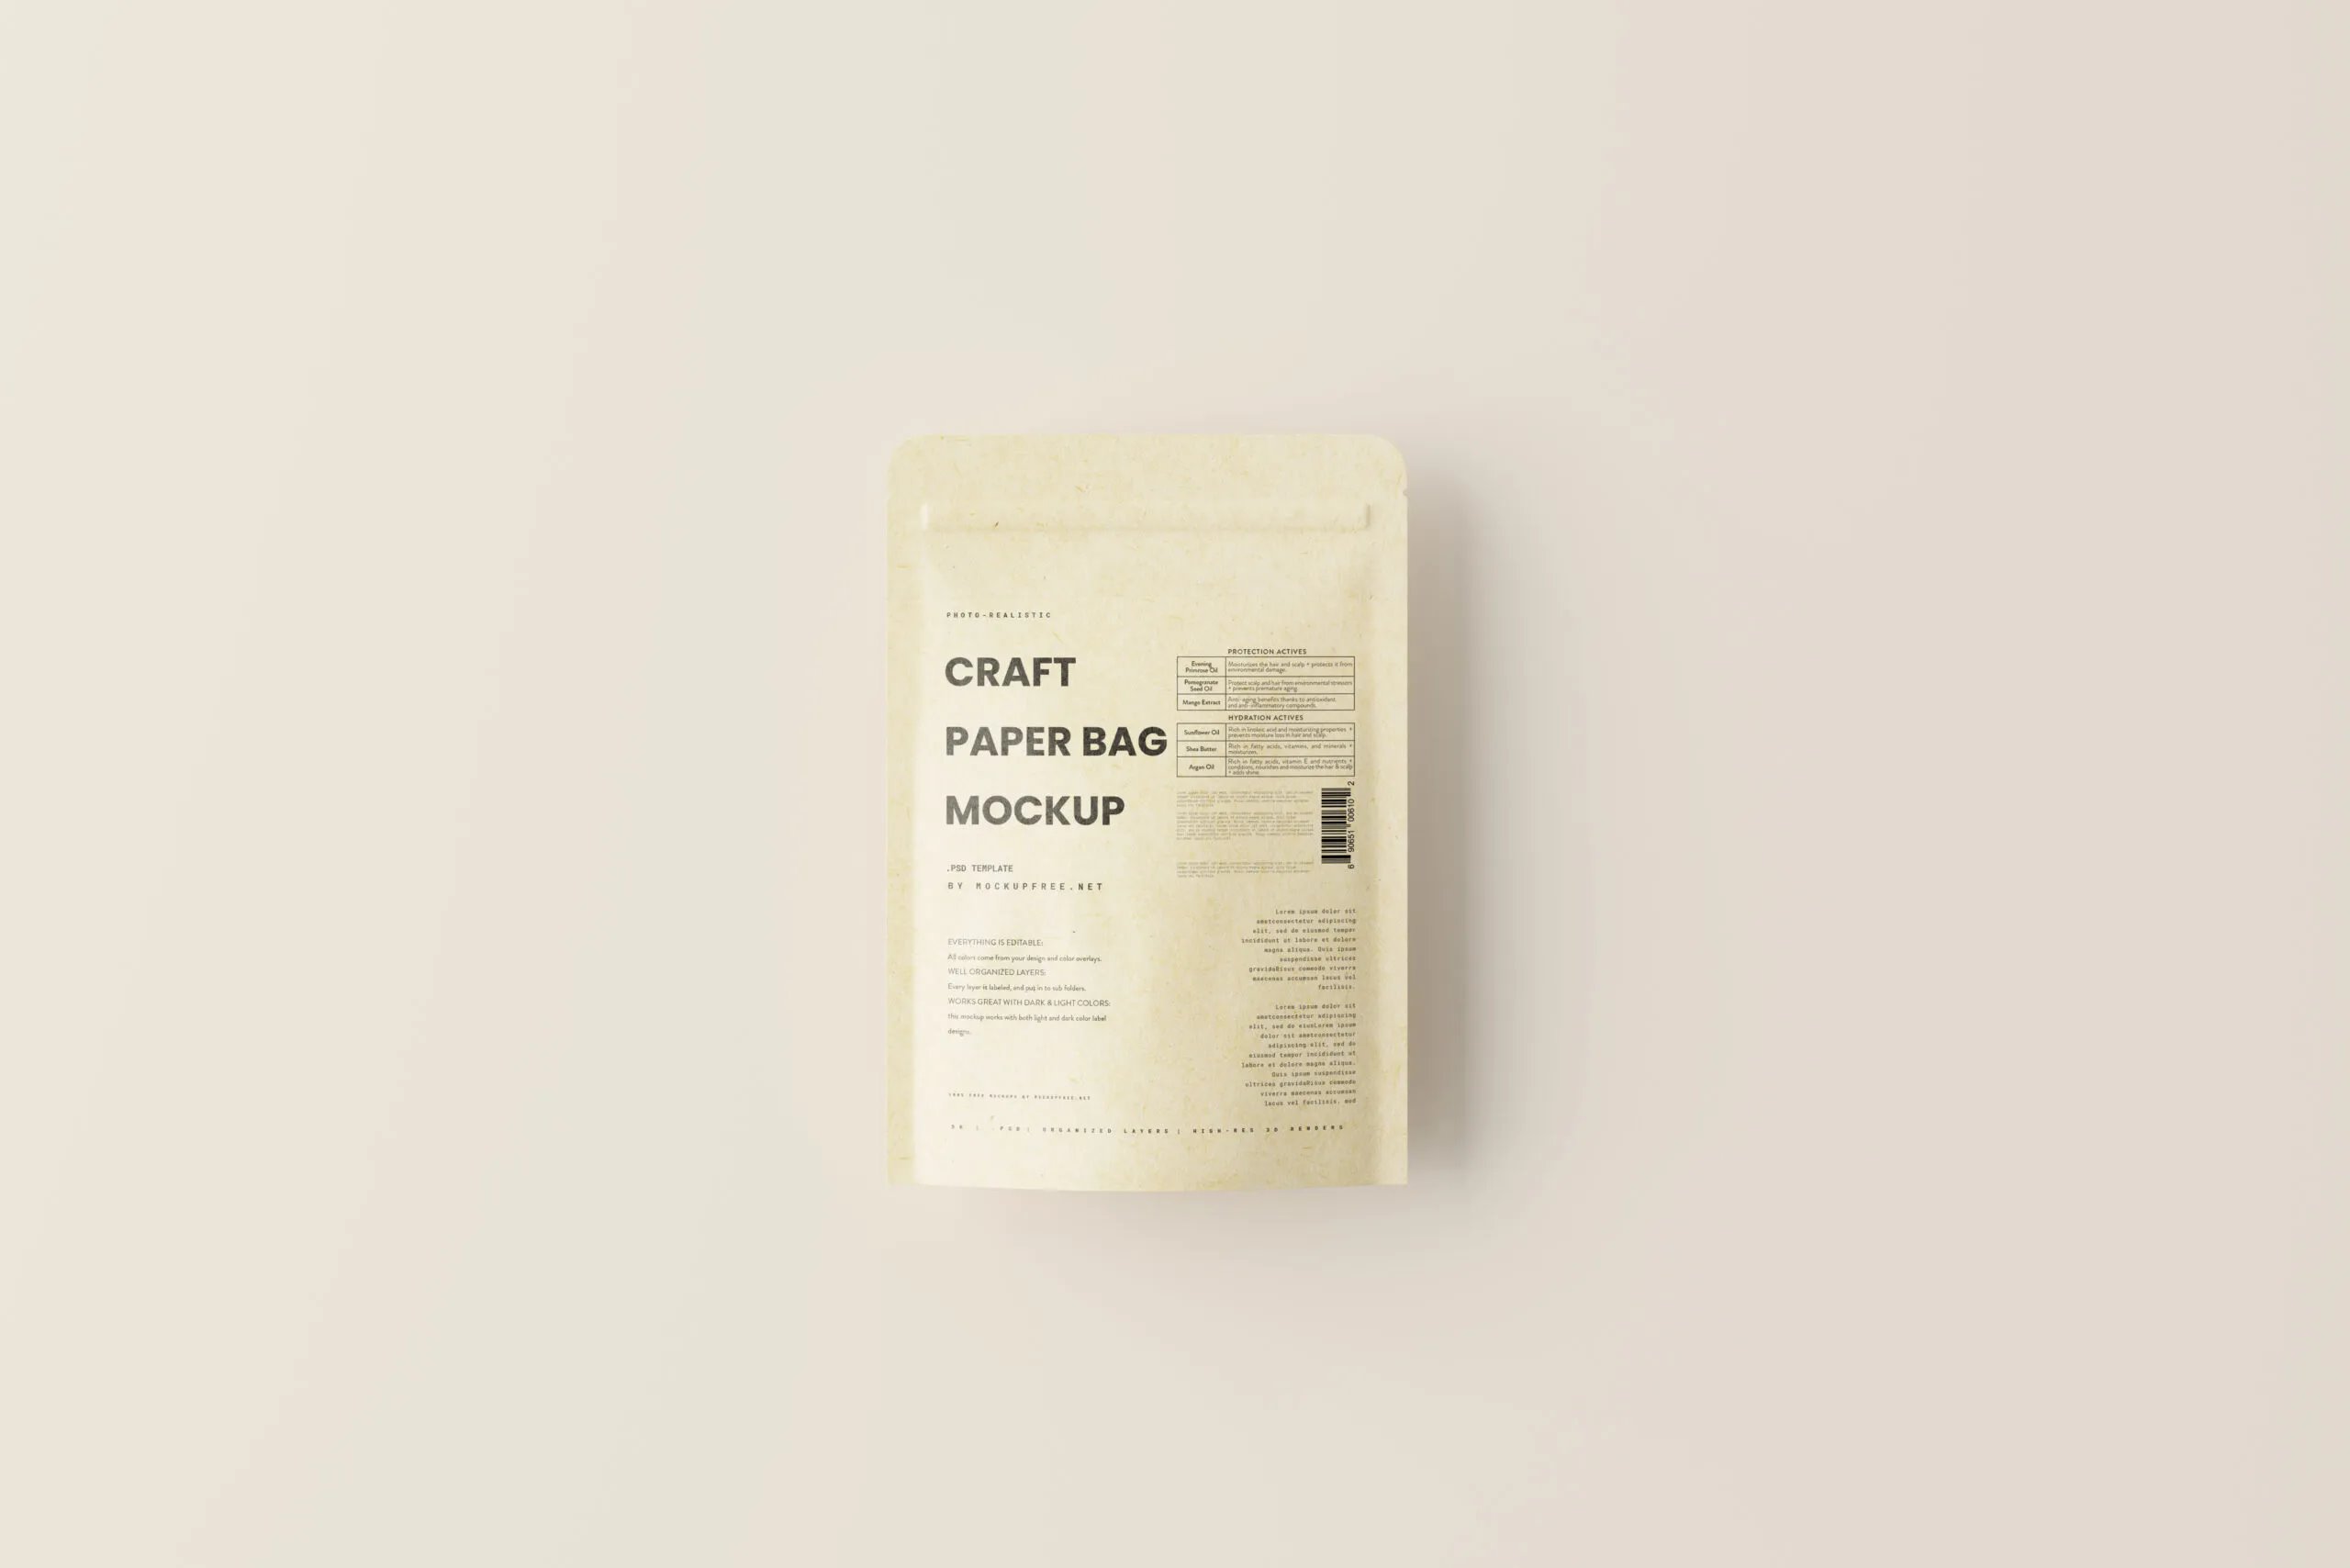 5 Craft Paper Bags Mockups in Varied Sights FREE PSD